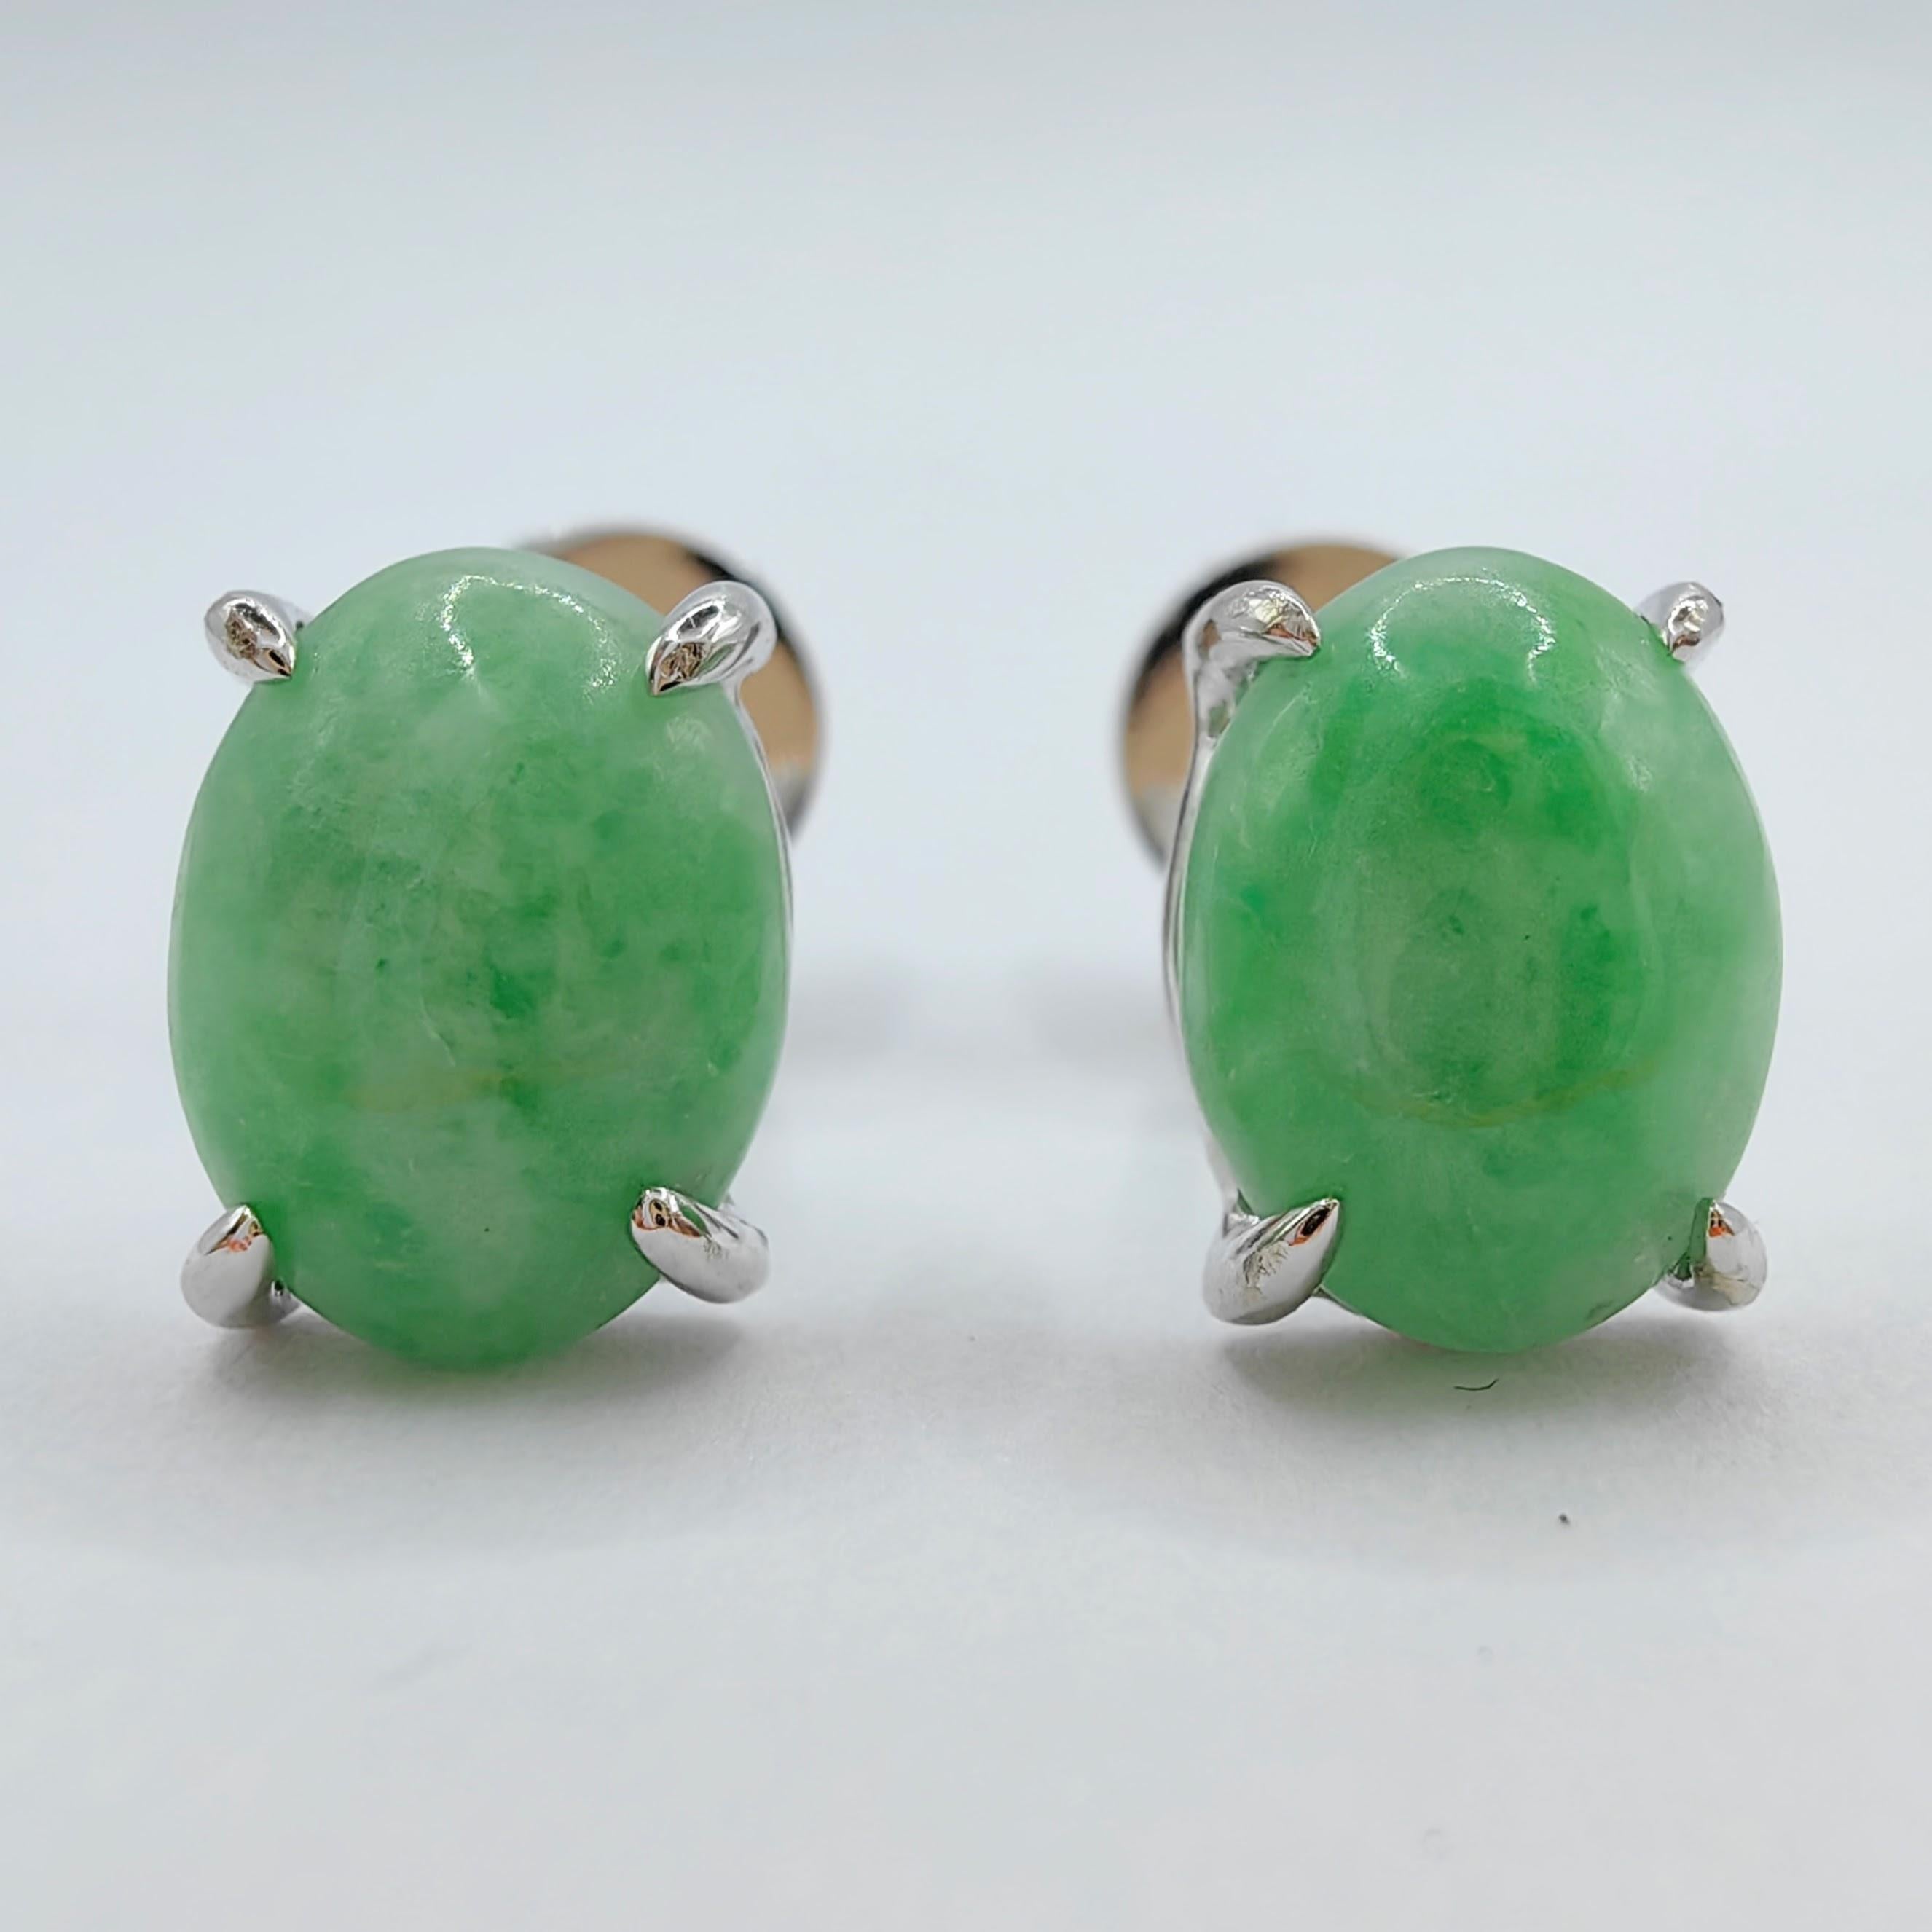 Introducing our stunning 8x6mm Burmese Oval Cabochon Apple Green Jadeite Jade Ear Studs in 18K White Gold, a pair of exquisite earrings that exude elegance and showcase the natural beauty of jadeite jade. These ear studs feature two captivating